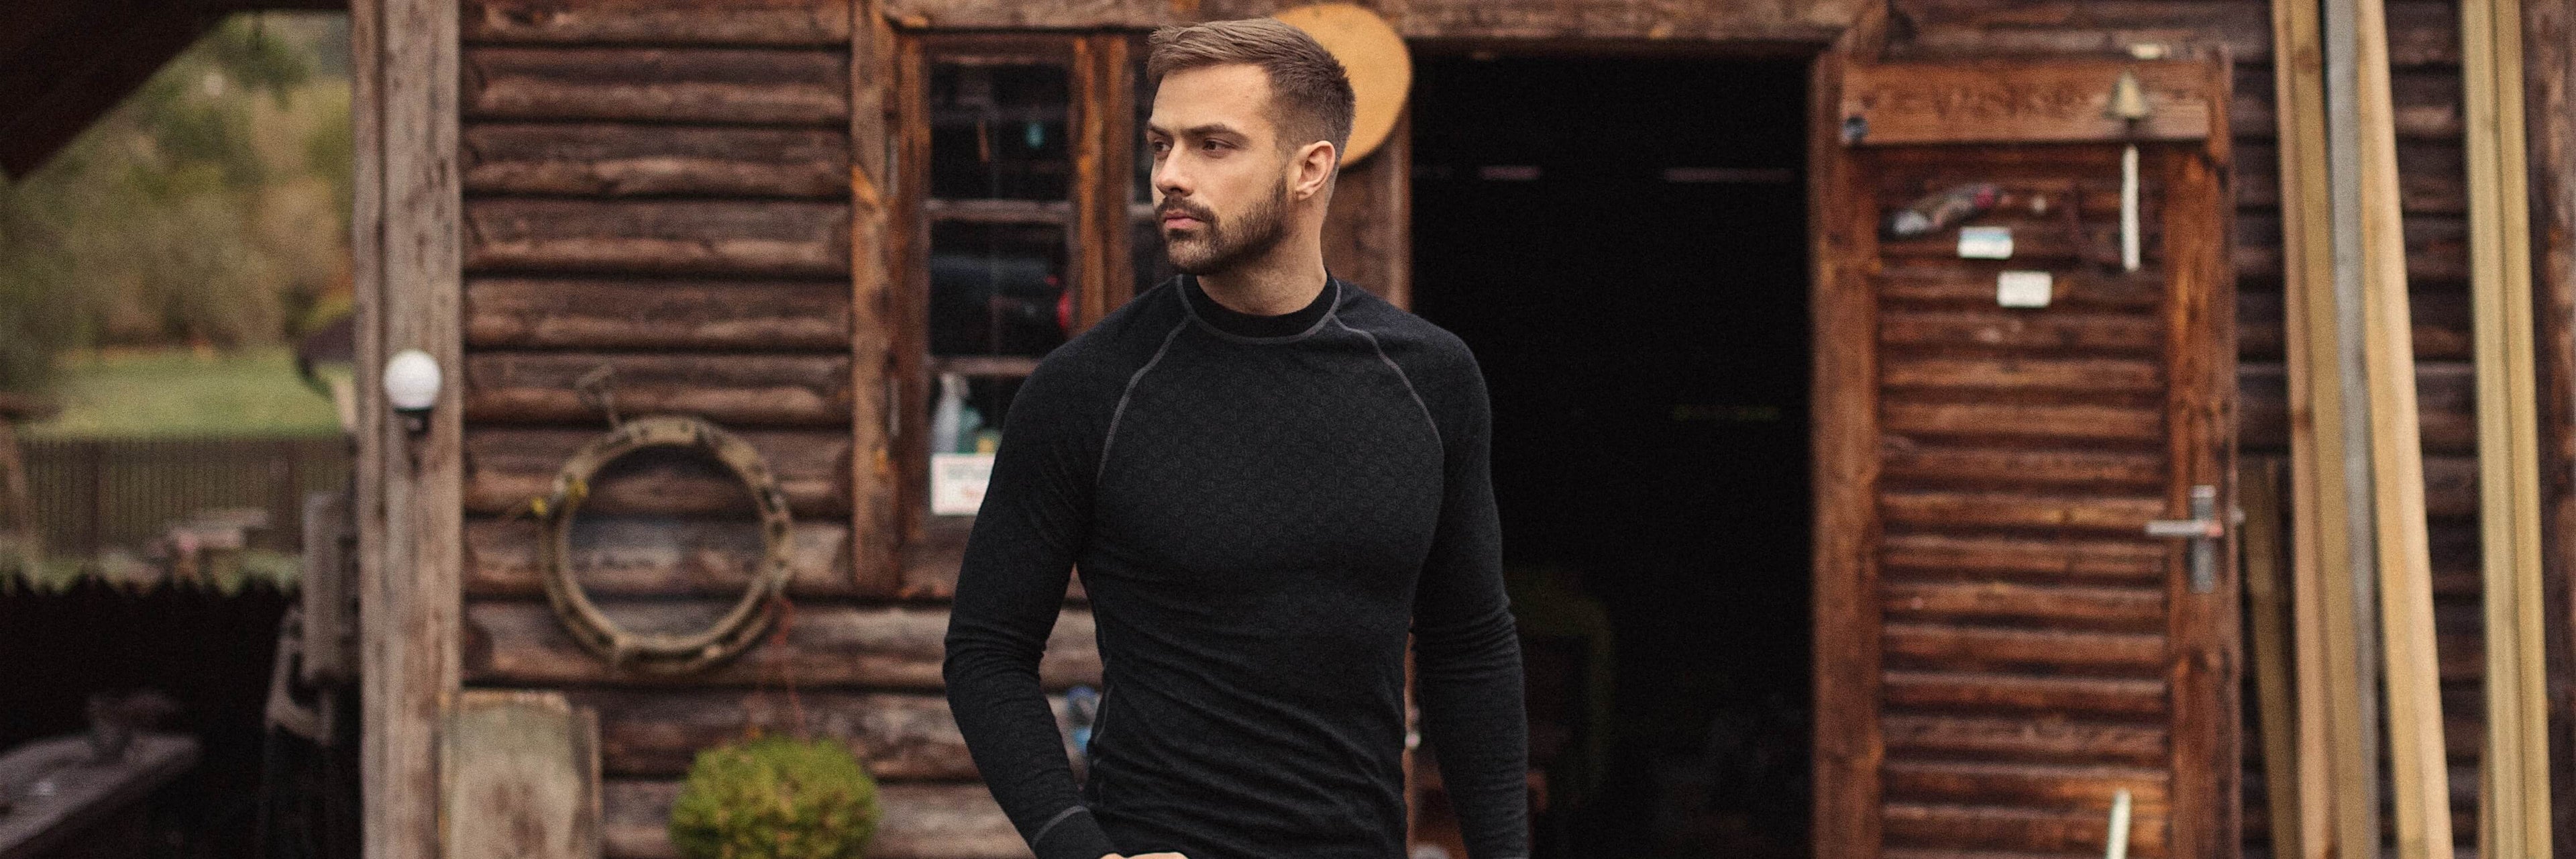 Man-with-black-thermal-clothes